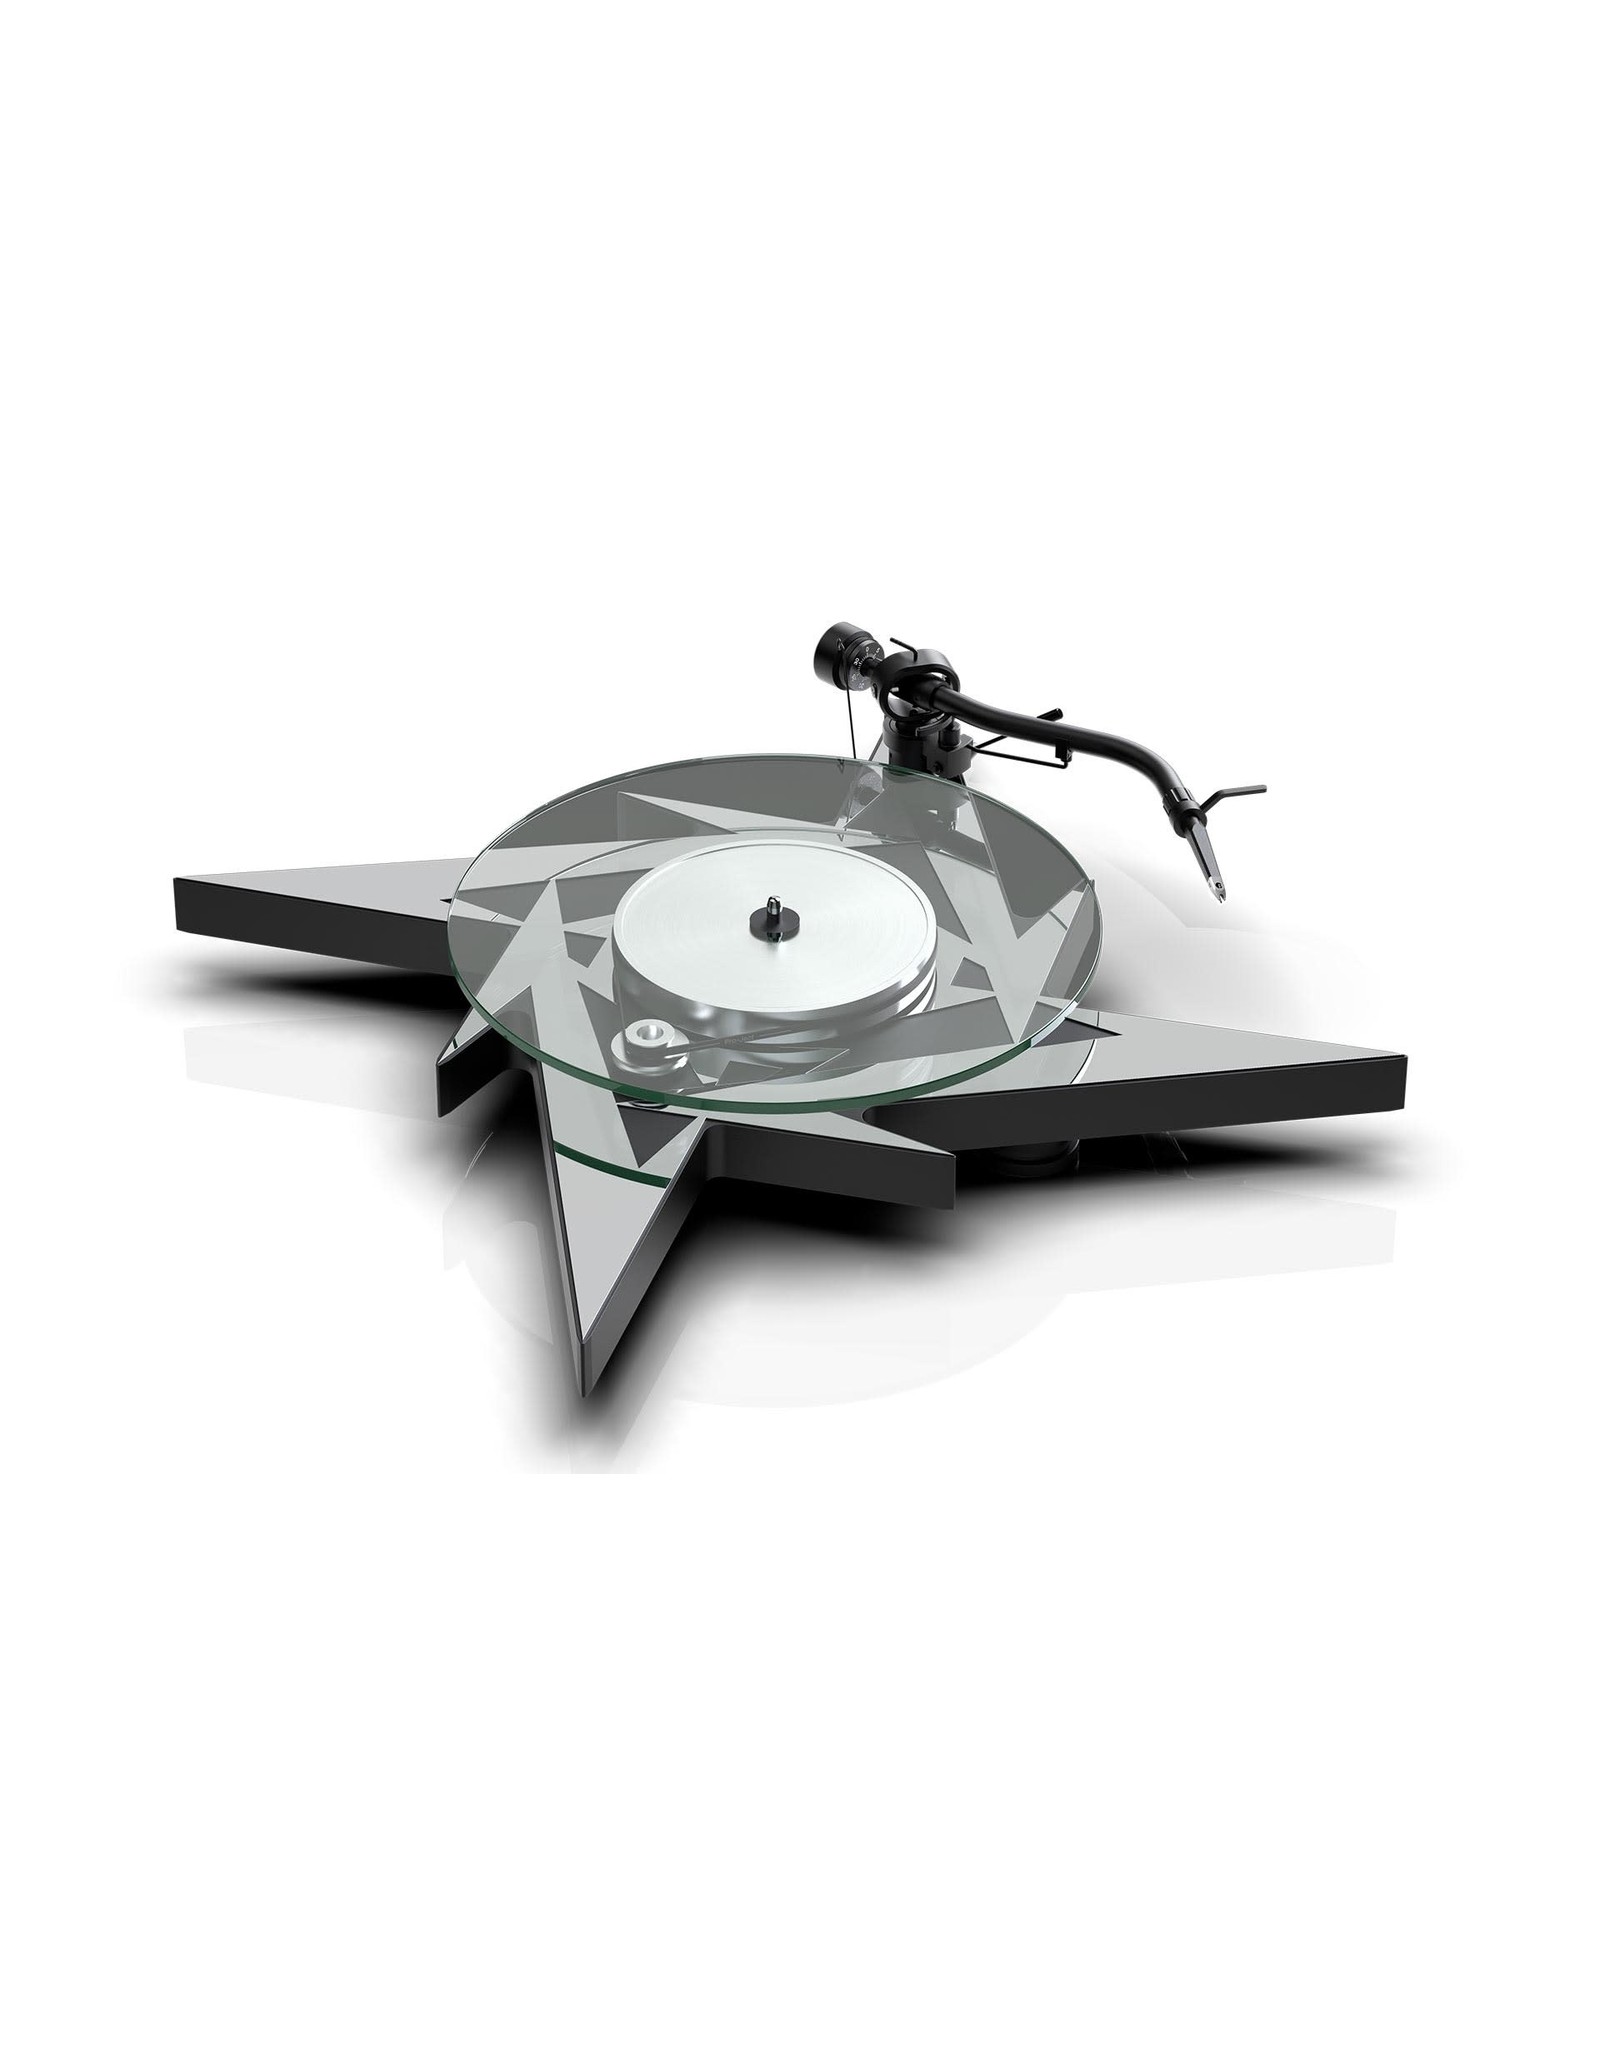 Pro-Ject Pro-Ject Metallica Turntable SALE PRICE